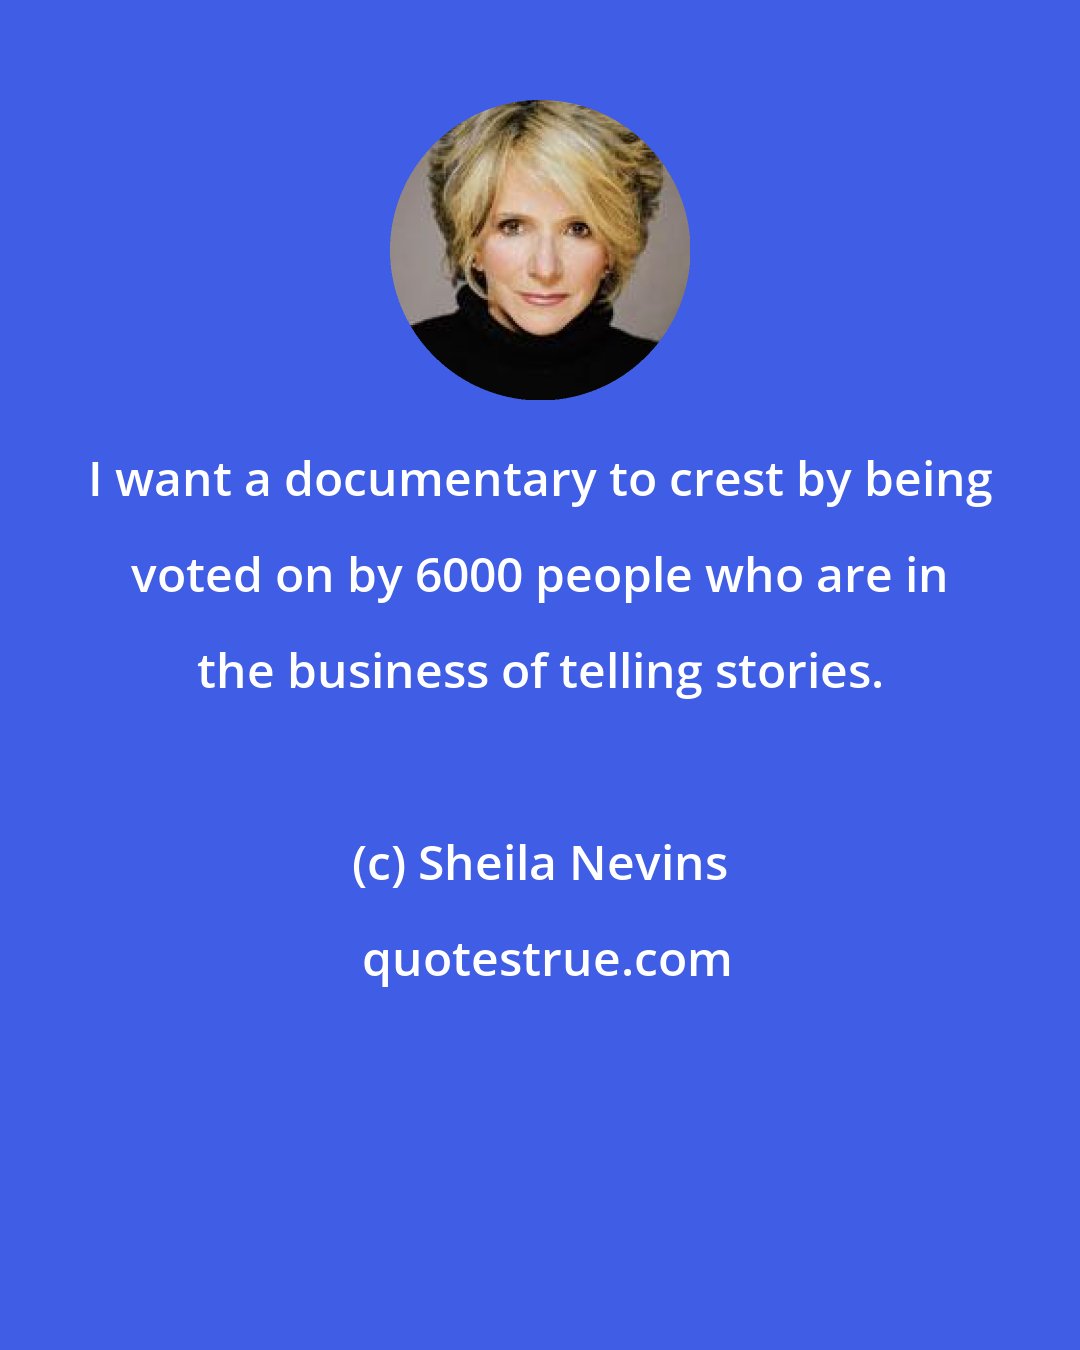 Sheila Nevins: I want a documentary to crest by being voted on by 6000 people who are in the business of telling stories.